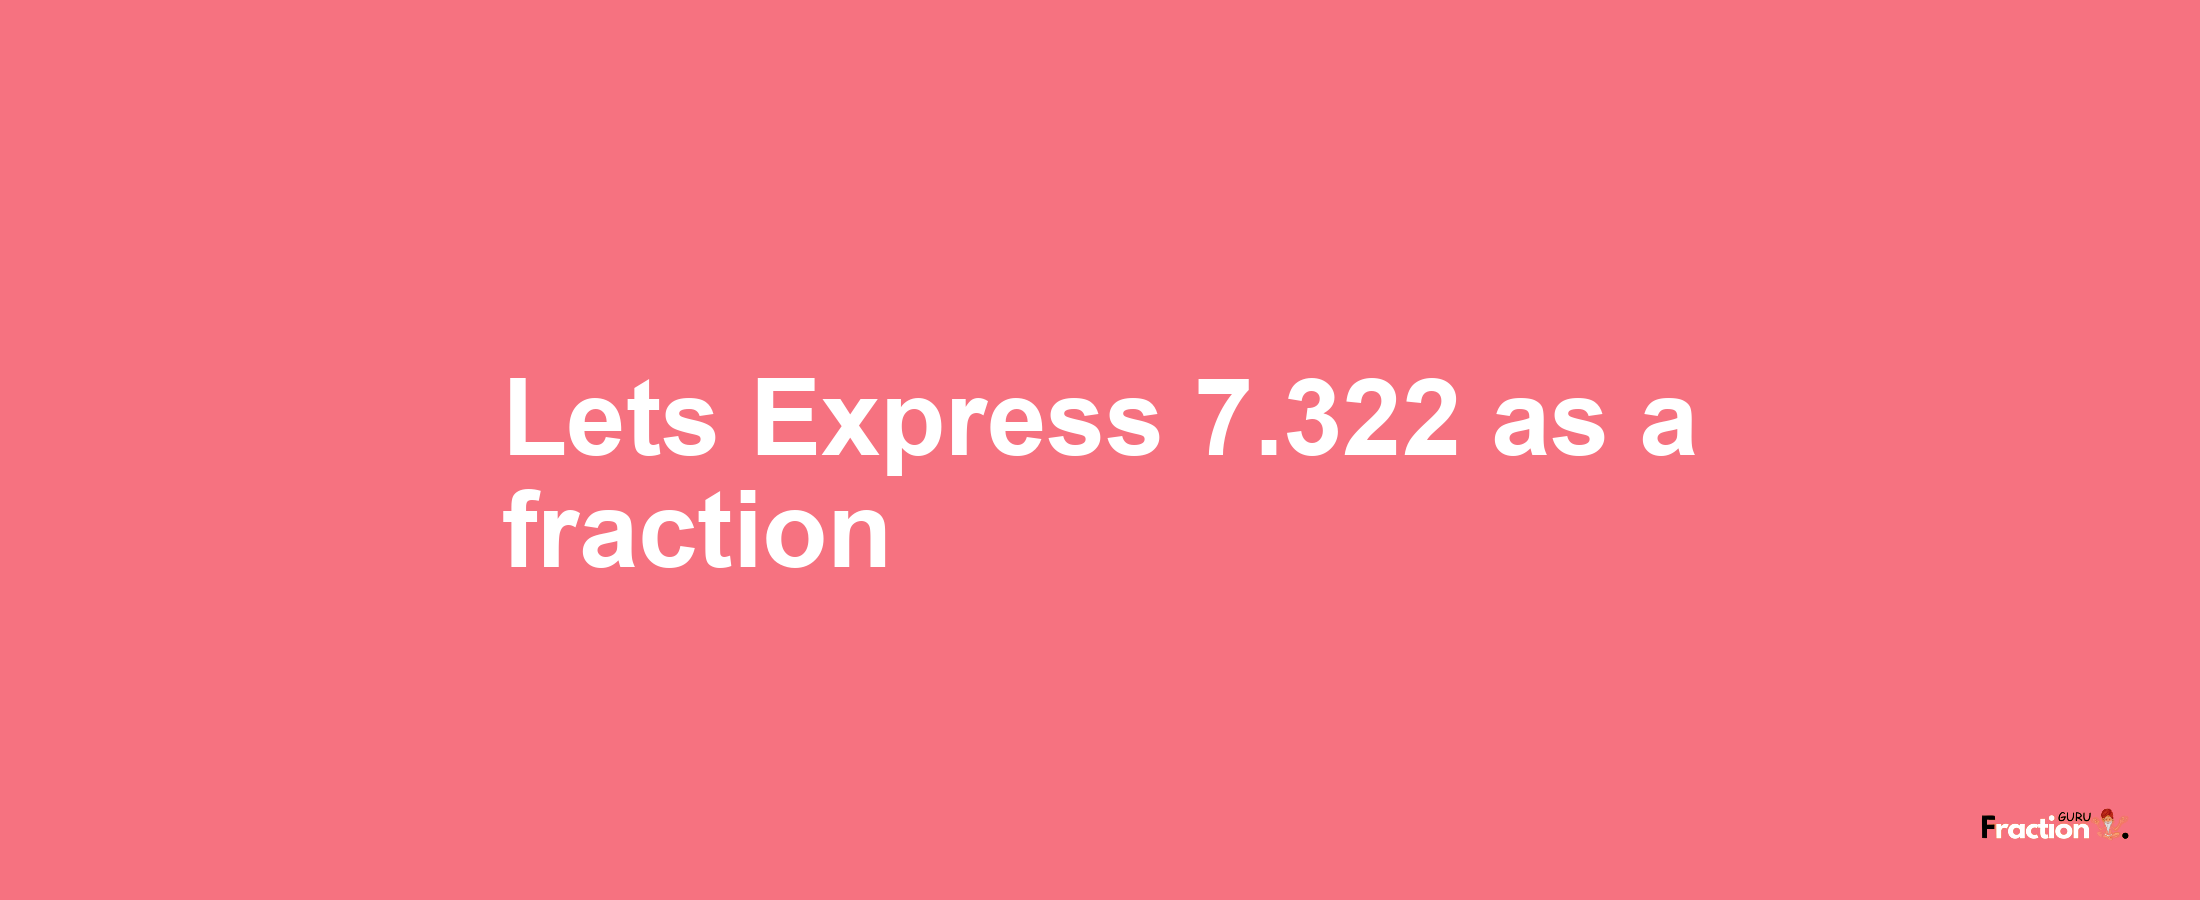 Lets Express 7.322 as afraction